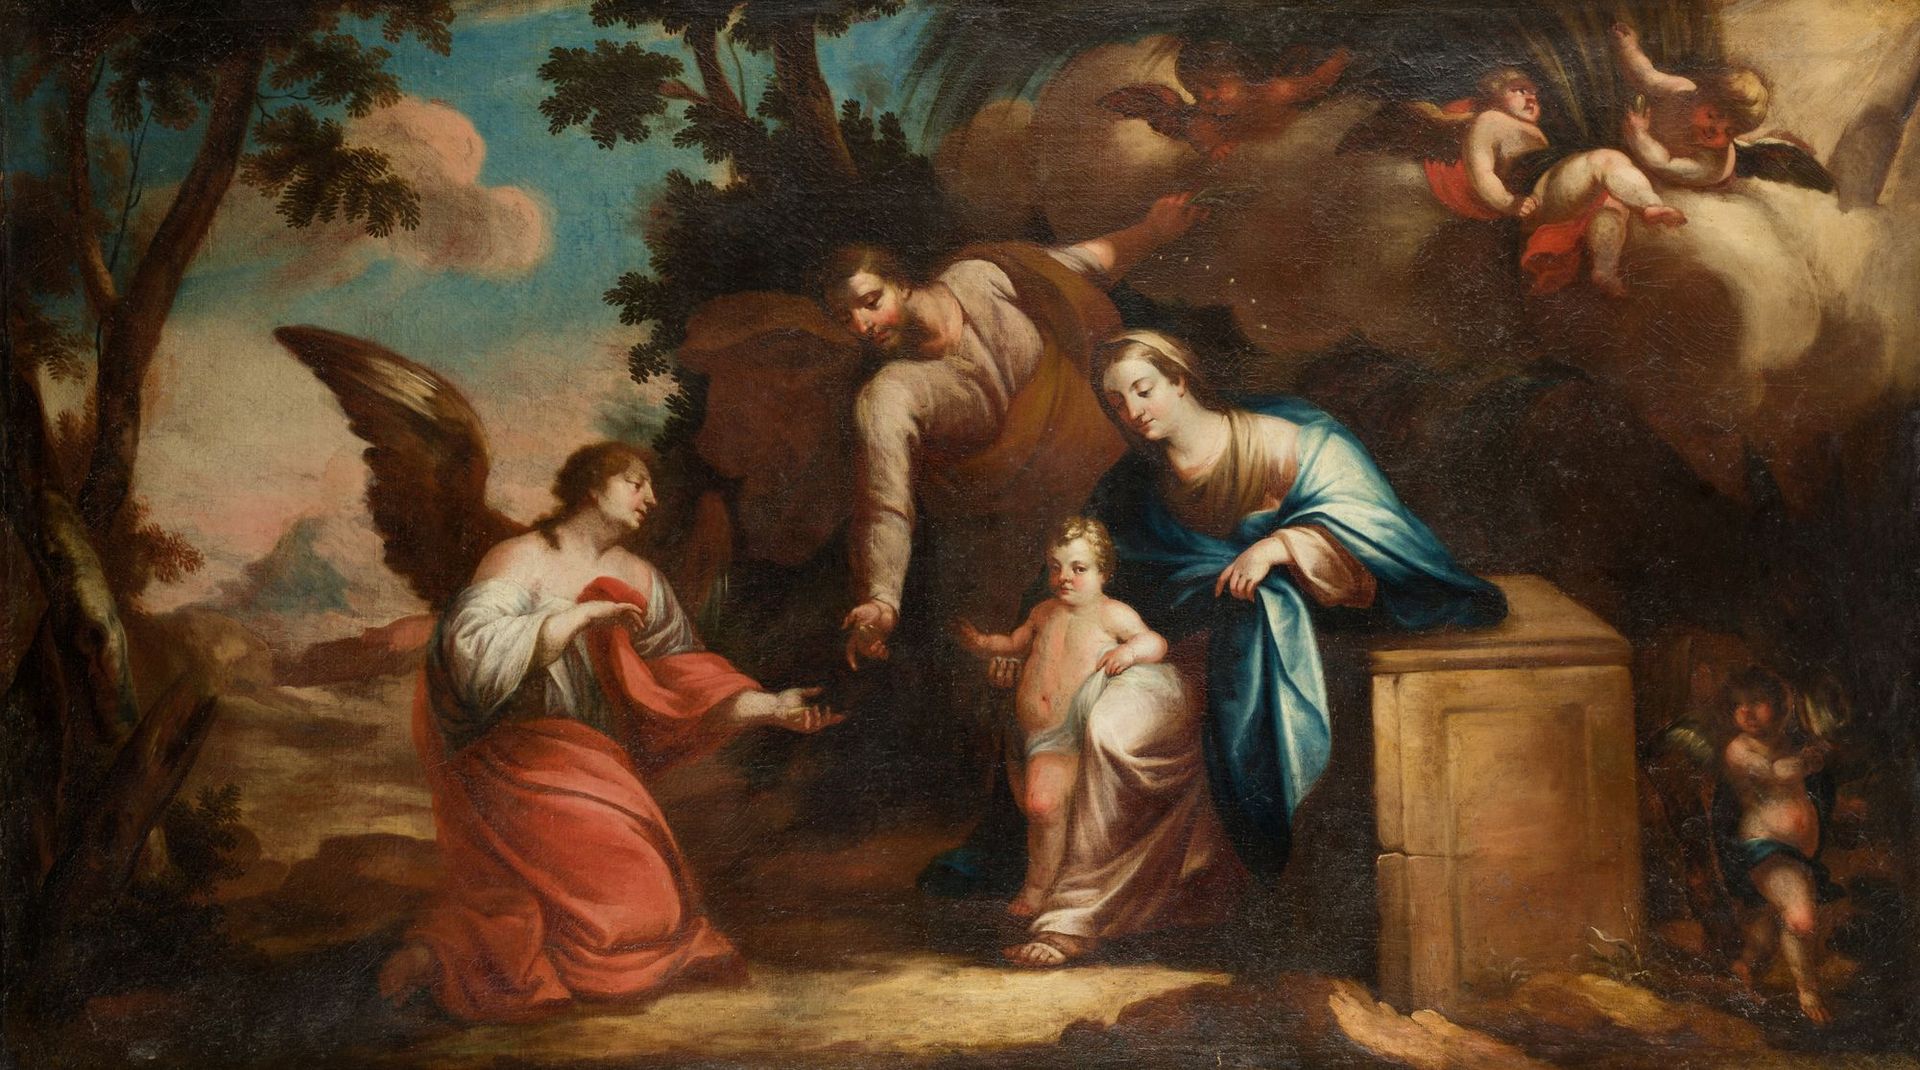 SPANISH SCHOOL (Late C. 17th - Early C. 18th) "Resting in the flight to Egypt" H&hellip;